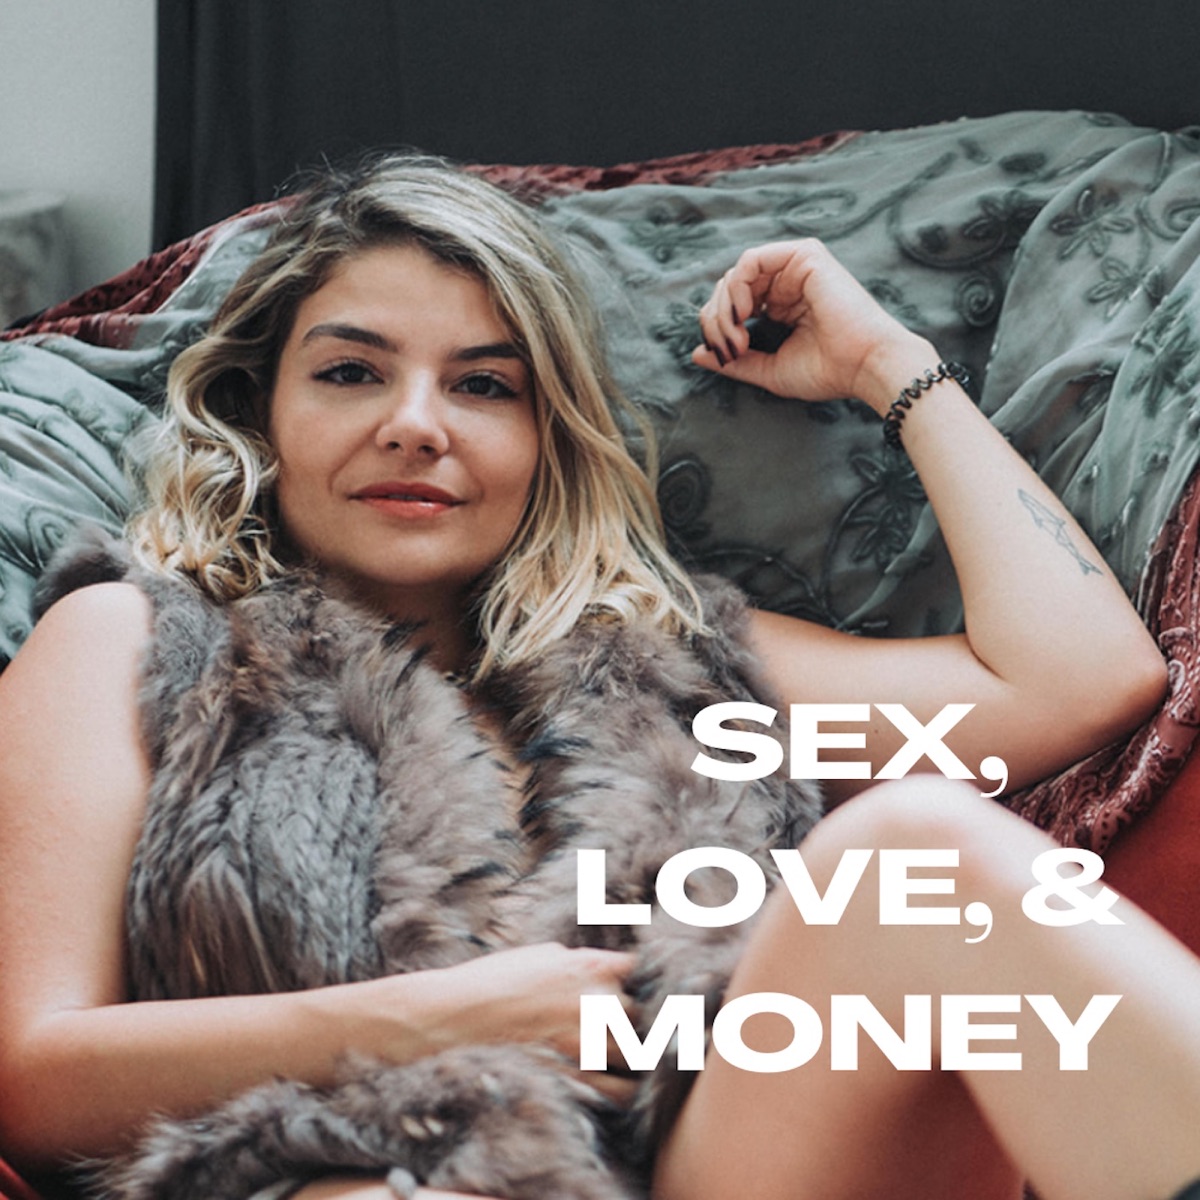 The Full Spectrum Of Humanity How Chaos Can Lead To Freedom Sex Love And Money Podcast 6469